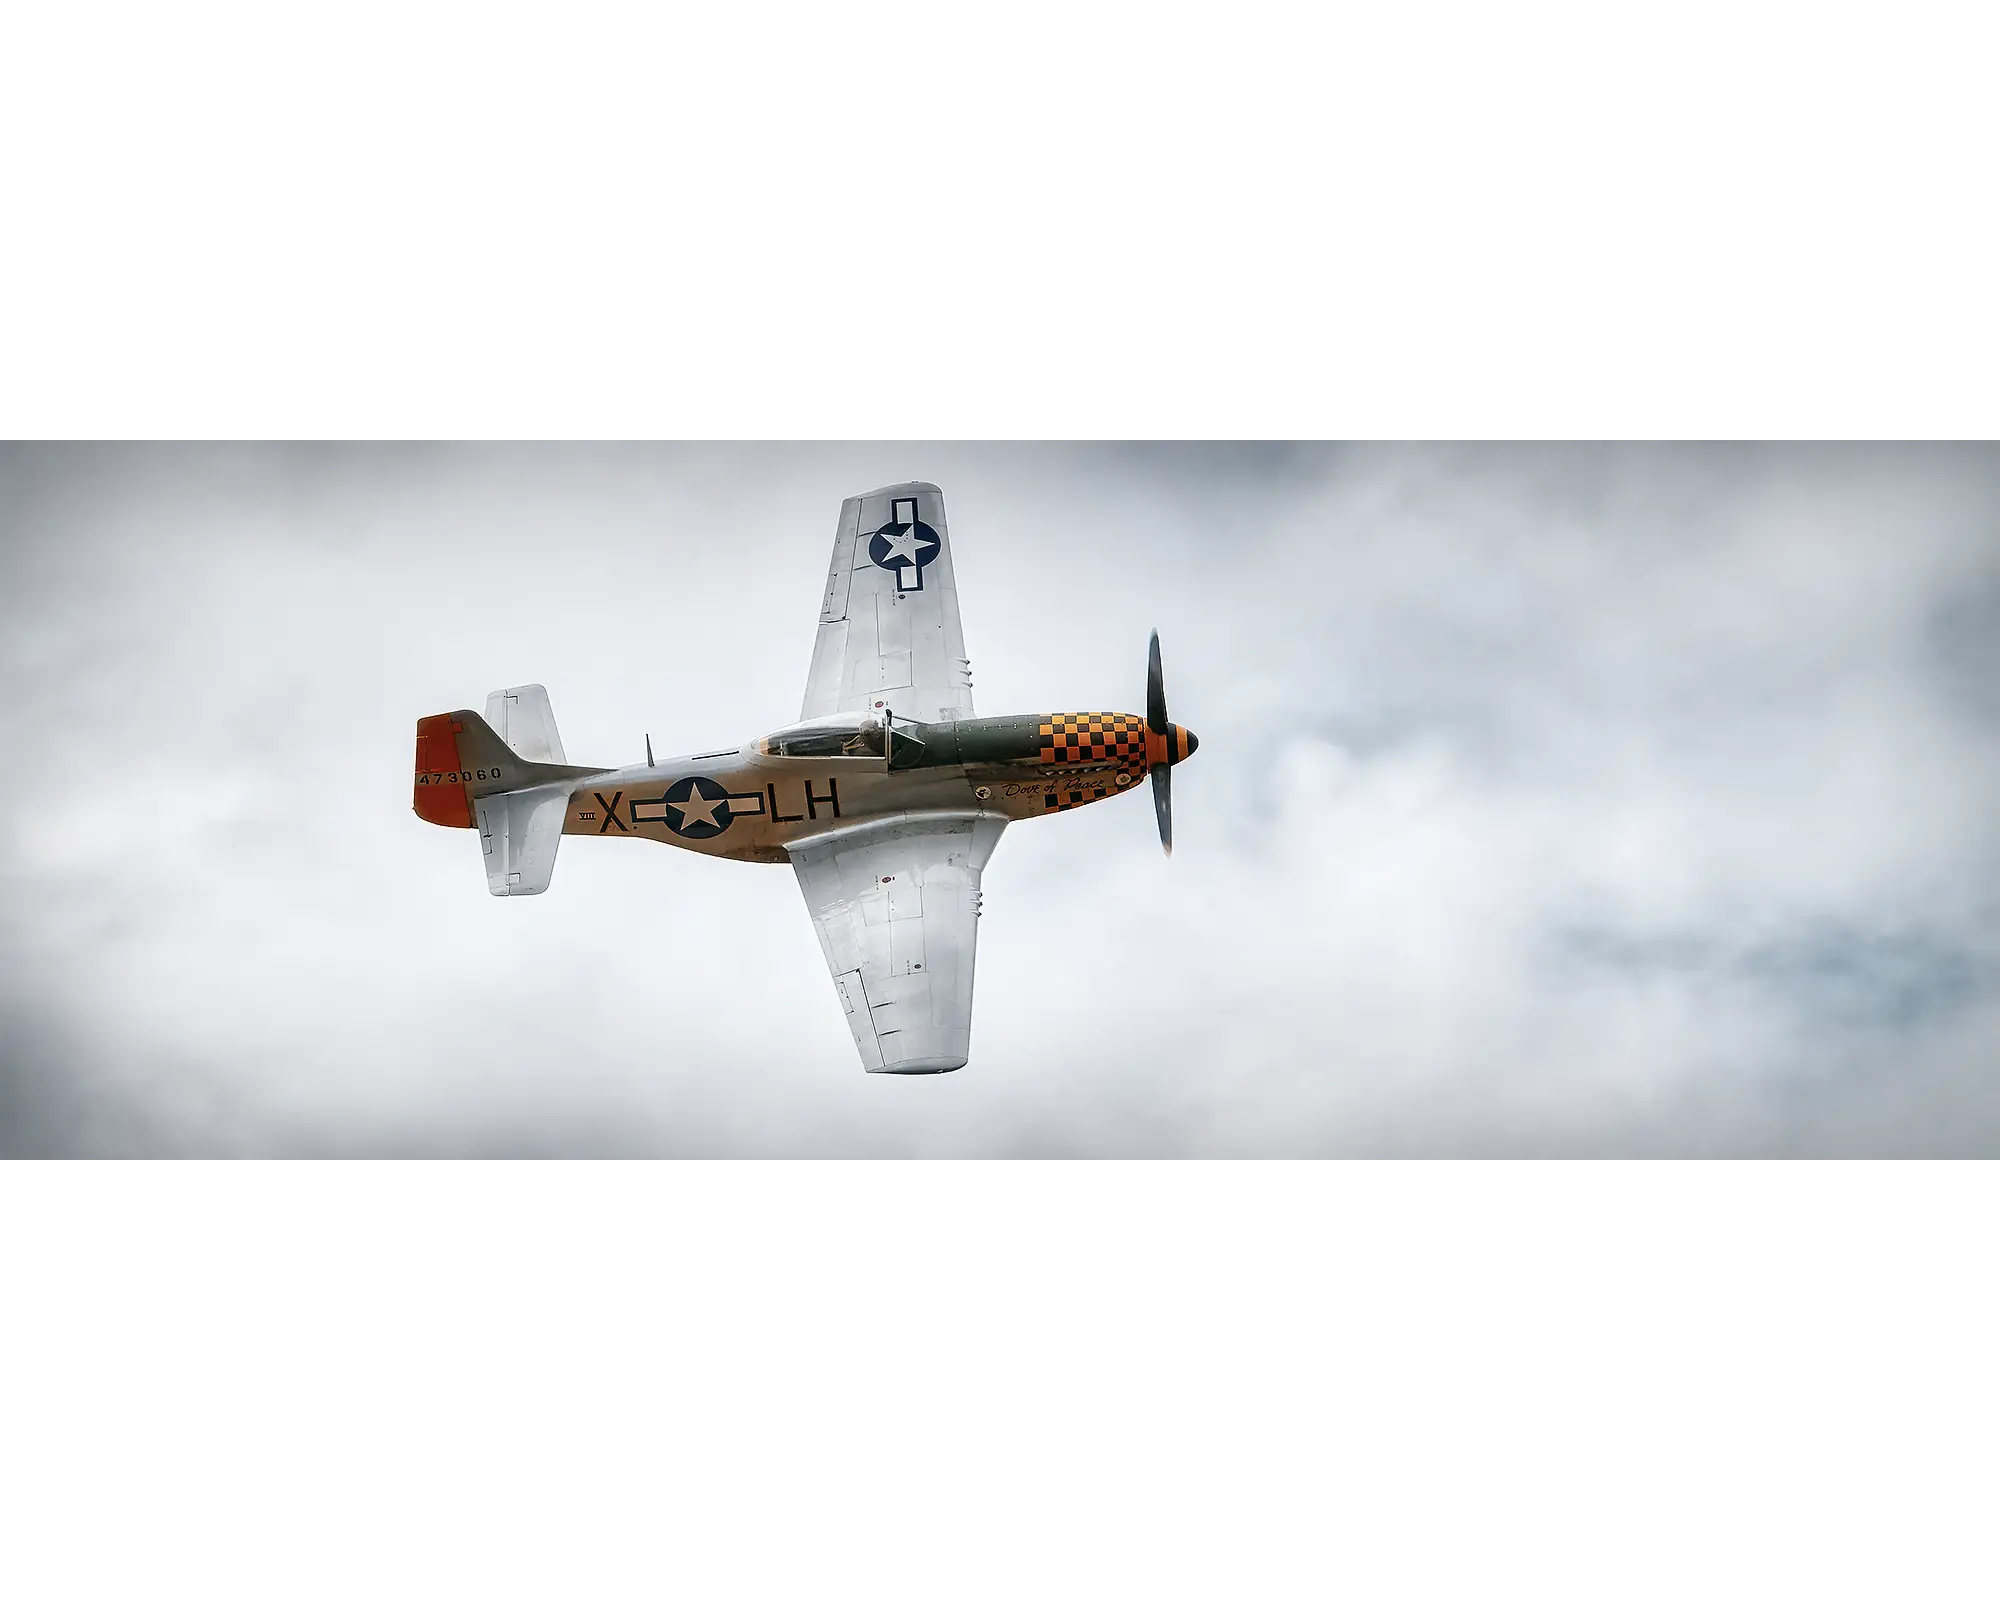 P-51 Mustang flying through clouds. 